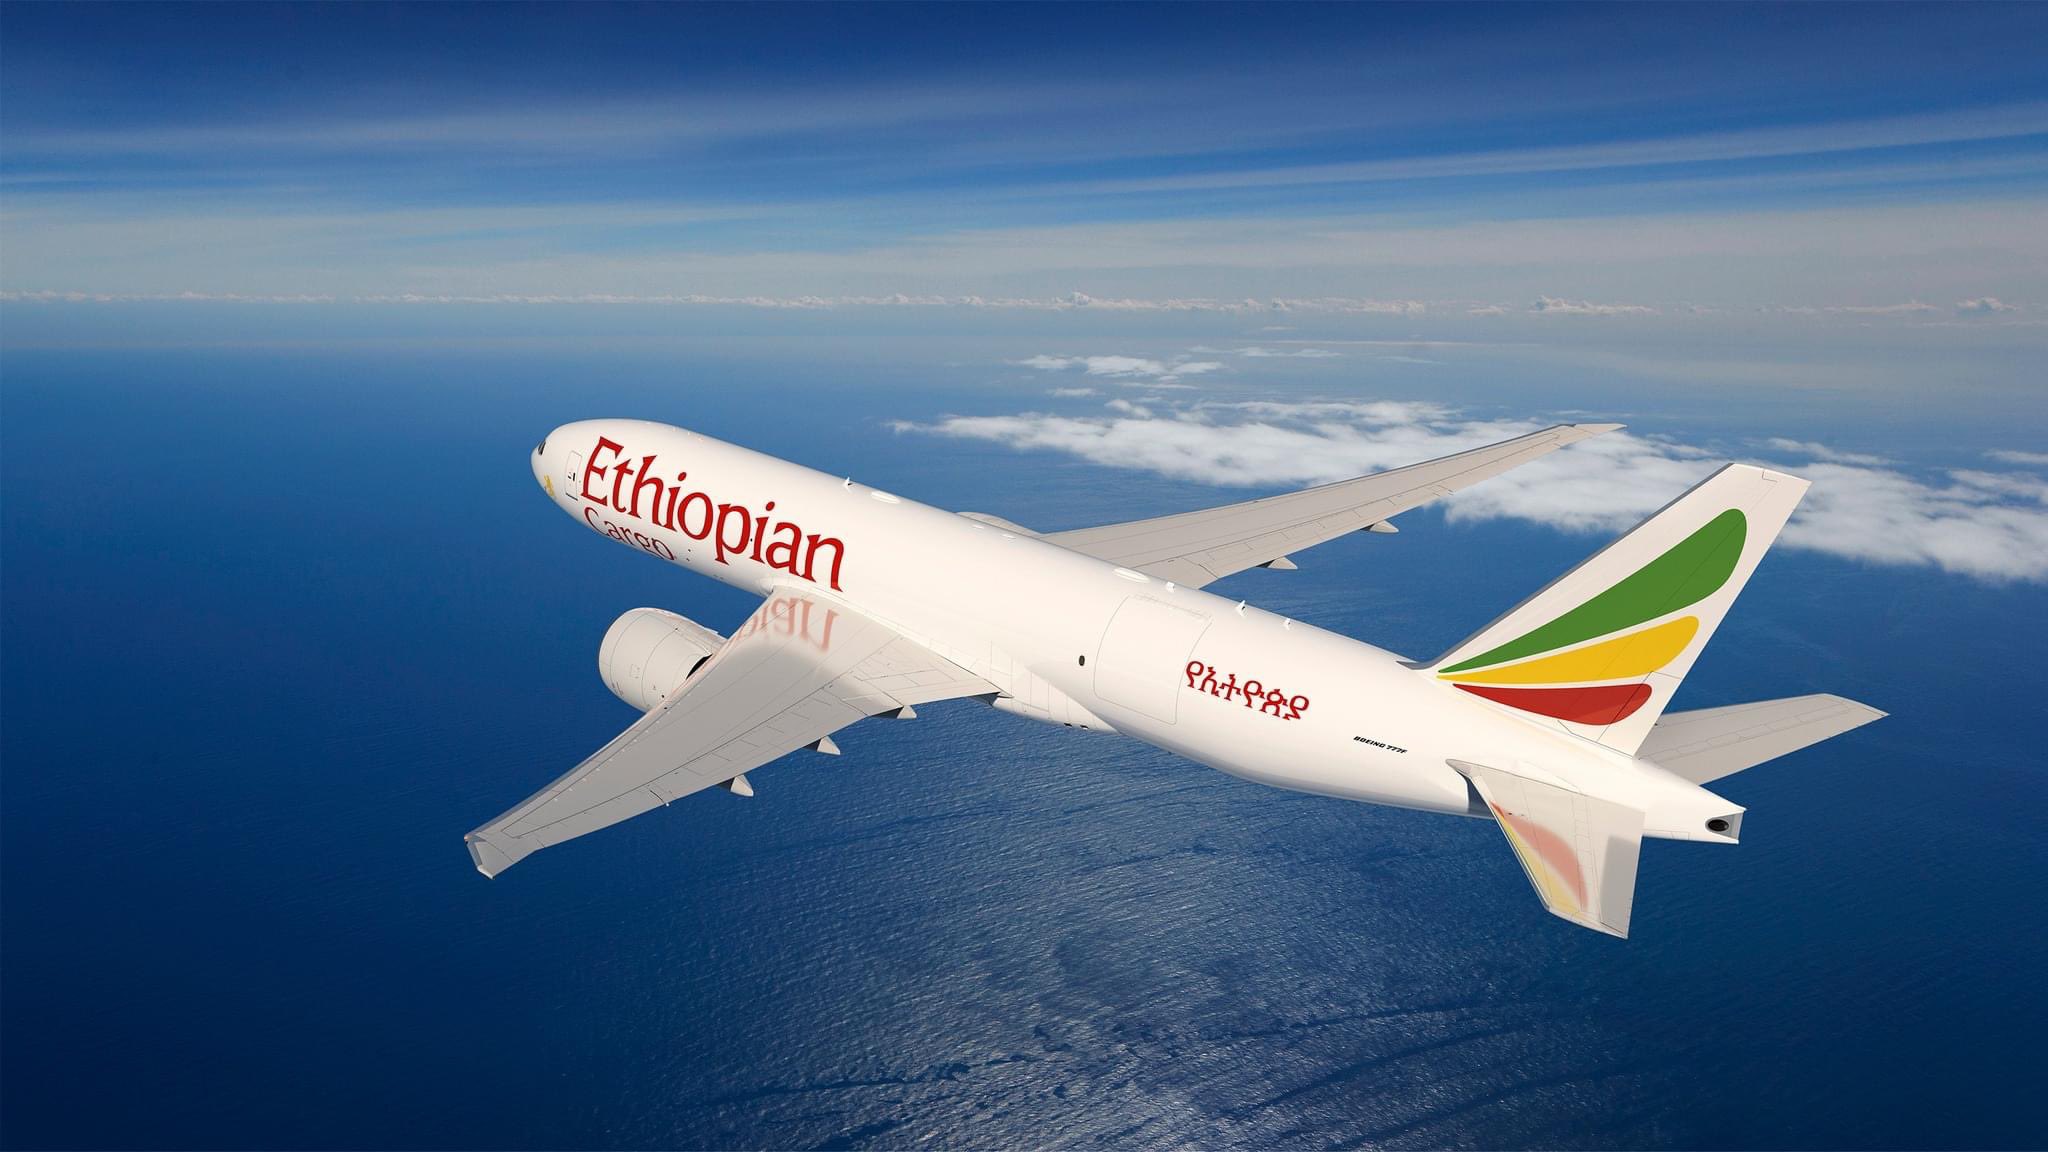 Ethiopian Airlines has finalized a $450 million loan agreement with Citibank to finance the acquisition of five new Boeing aircraft.